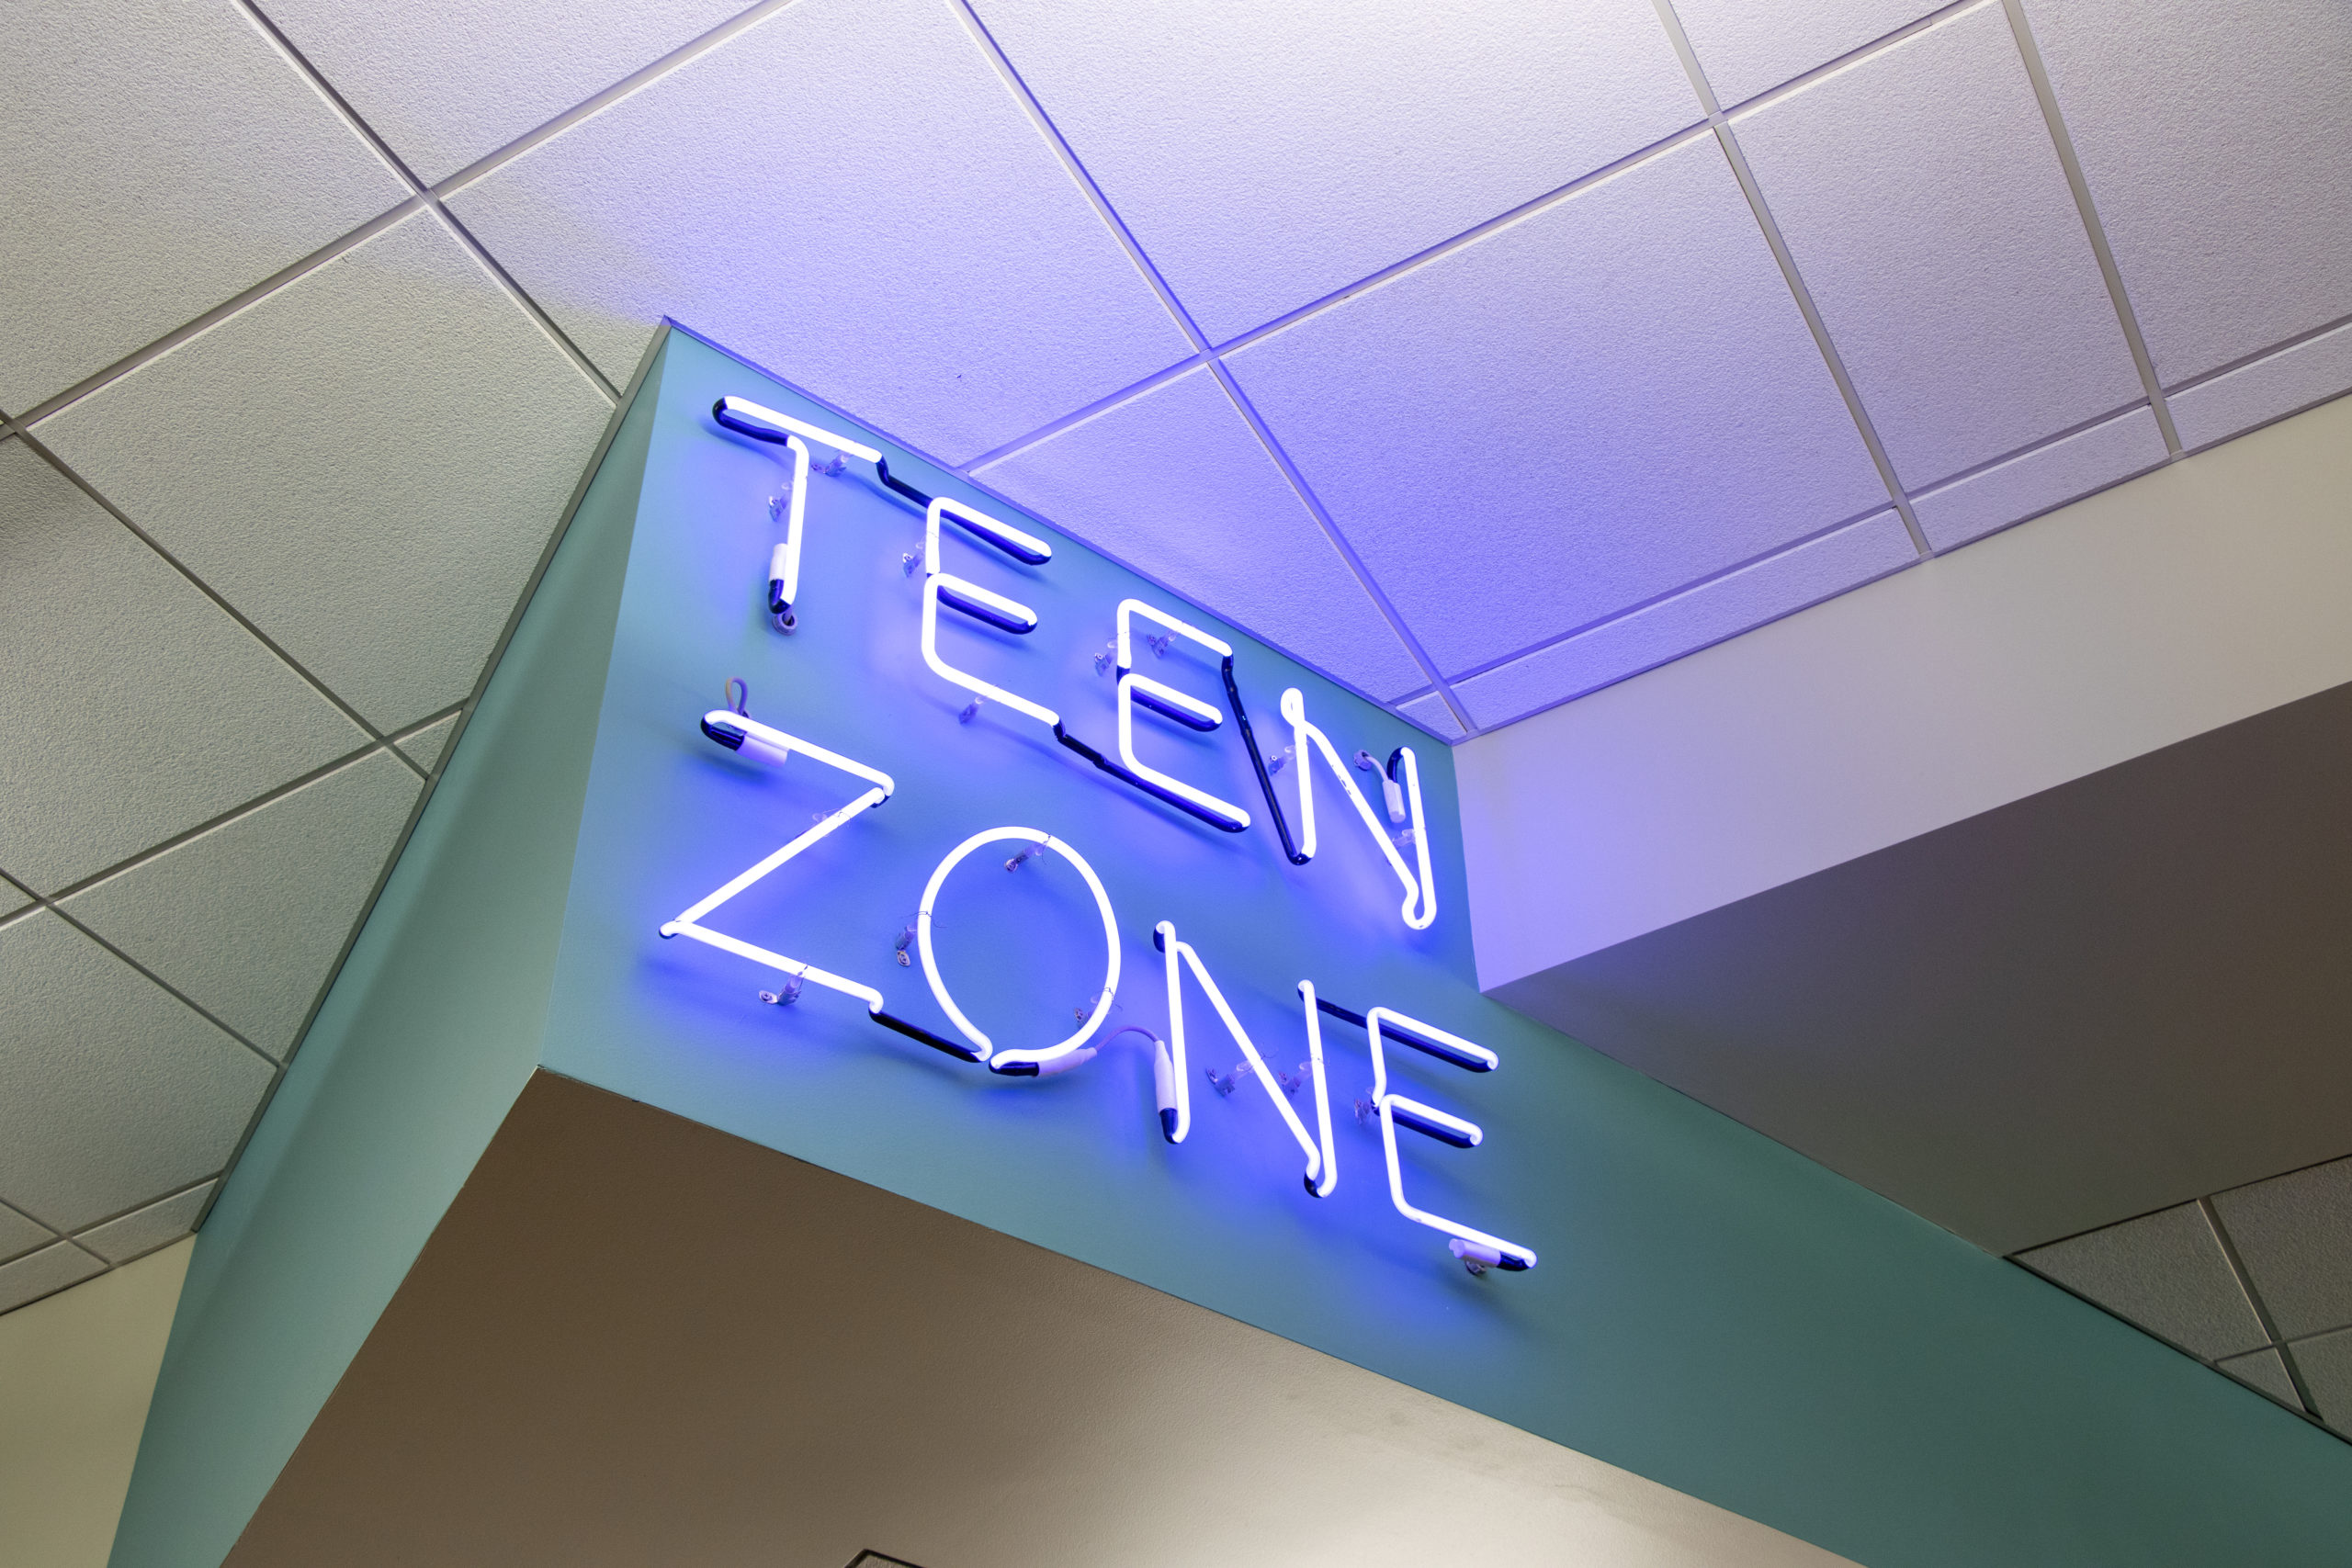 The Teen Zone at EVPL Central.